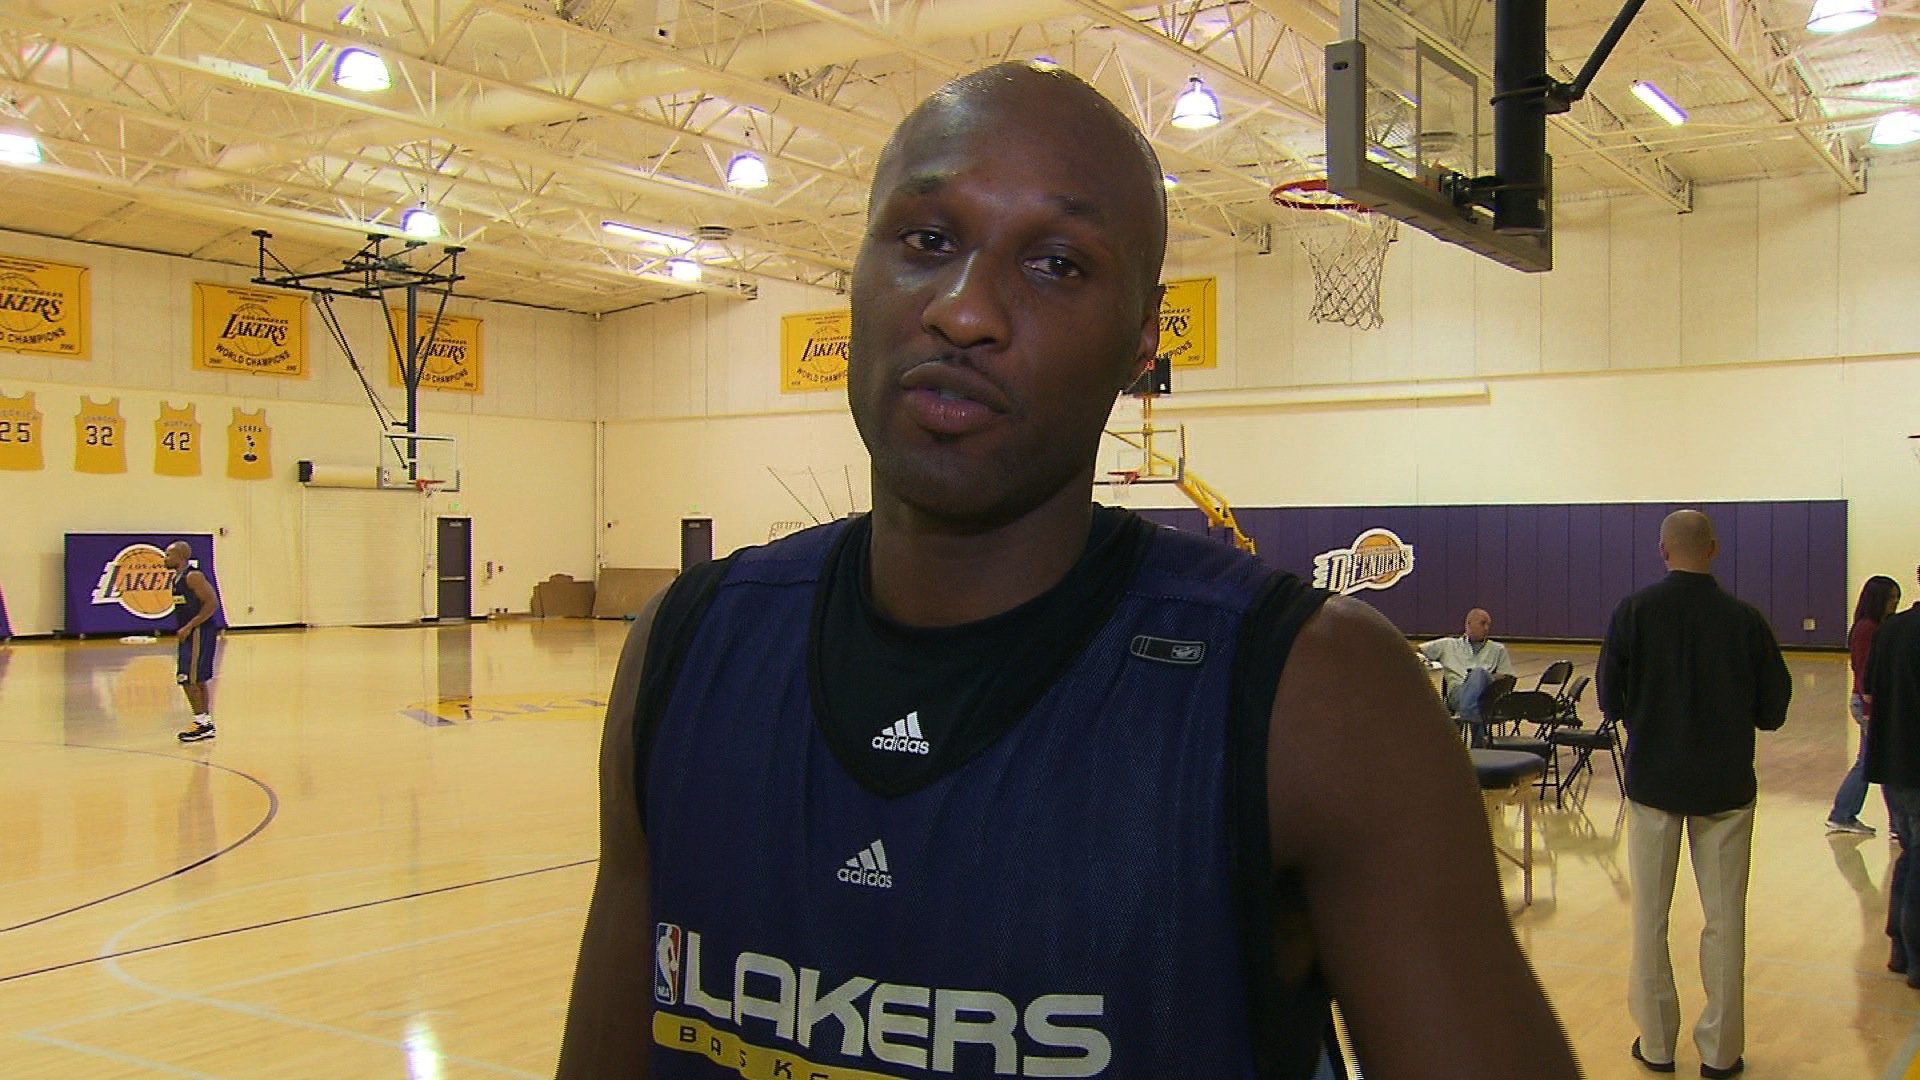 Lamar Odom, who won two NBA championships while a forward for the Los Angeles Lakers, has been hospitalized in Las Vegas, the Nye County Sheriff's Office announced.